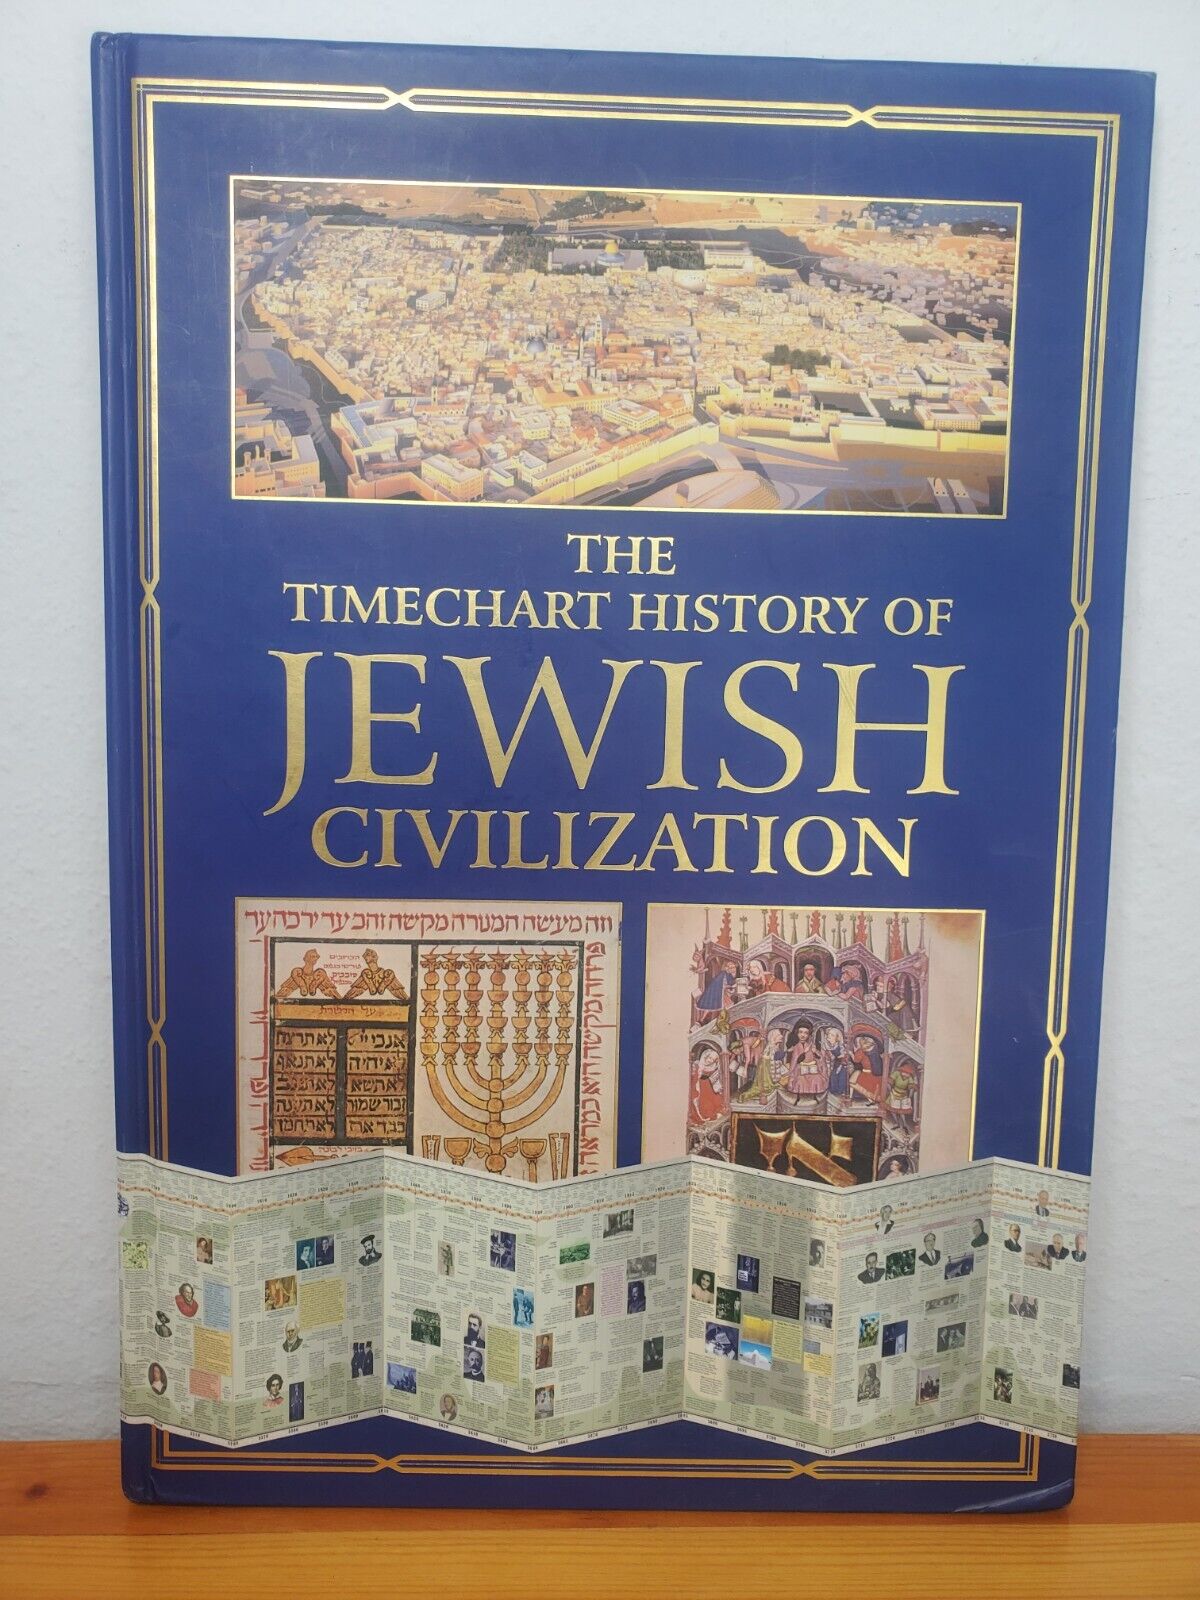 The Timechart History of Jewish Civilization. 11 Ft long fold out book, 2006 ed.